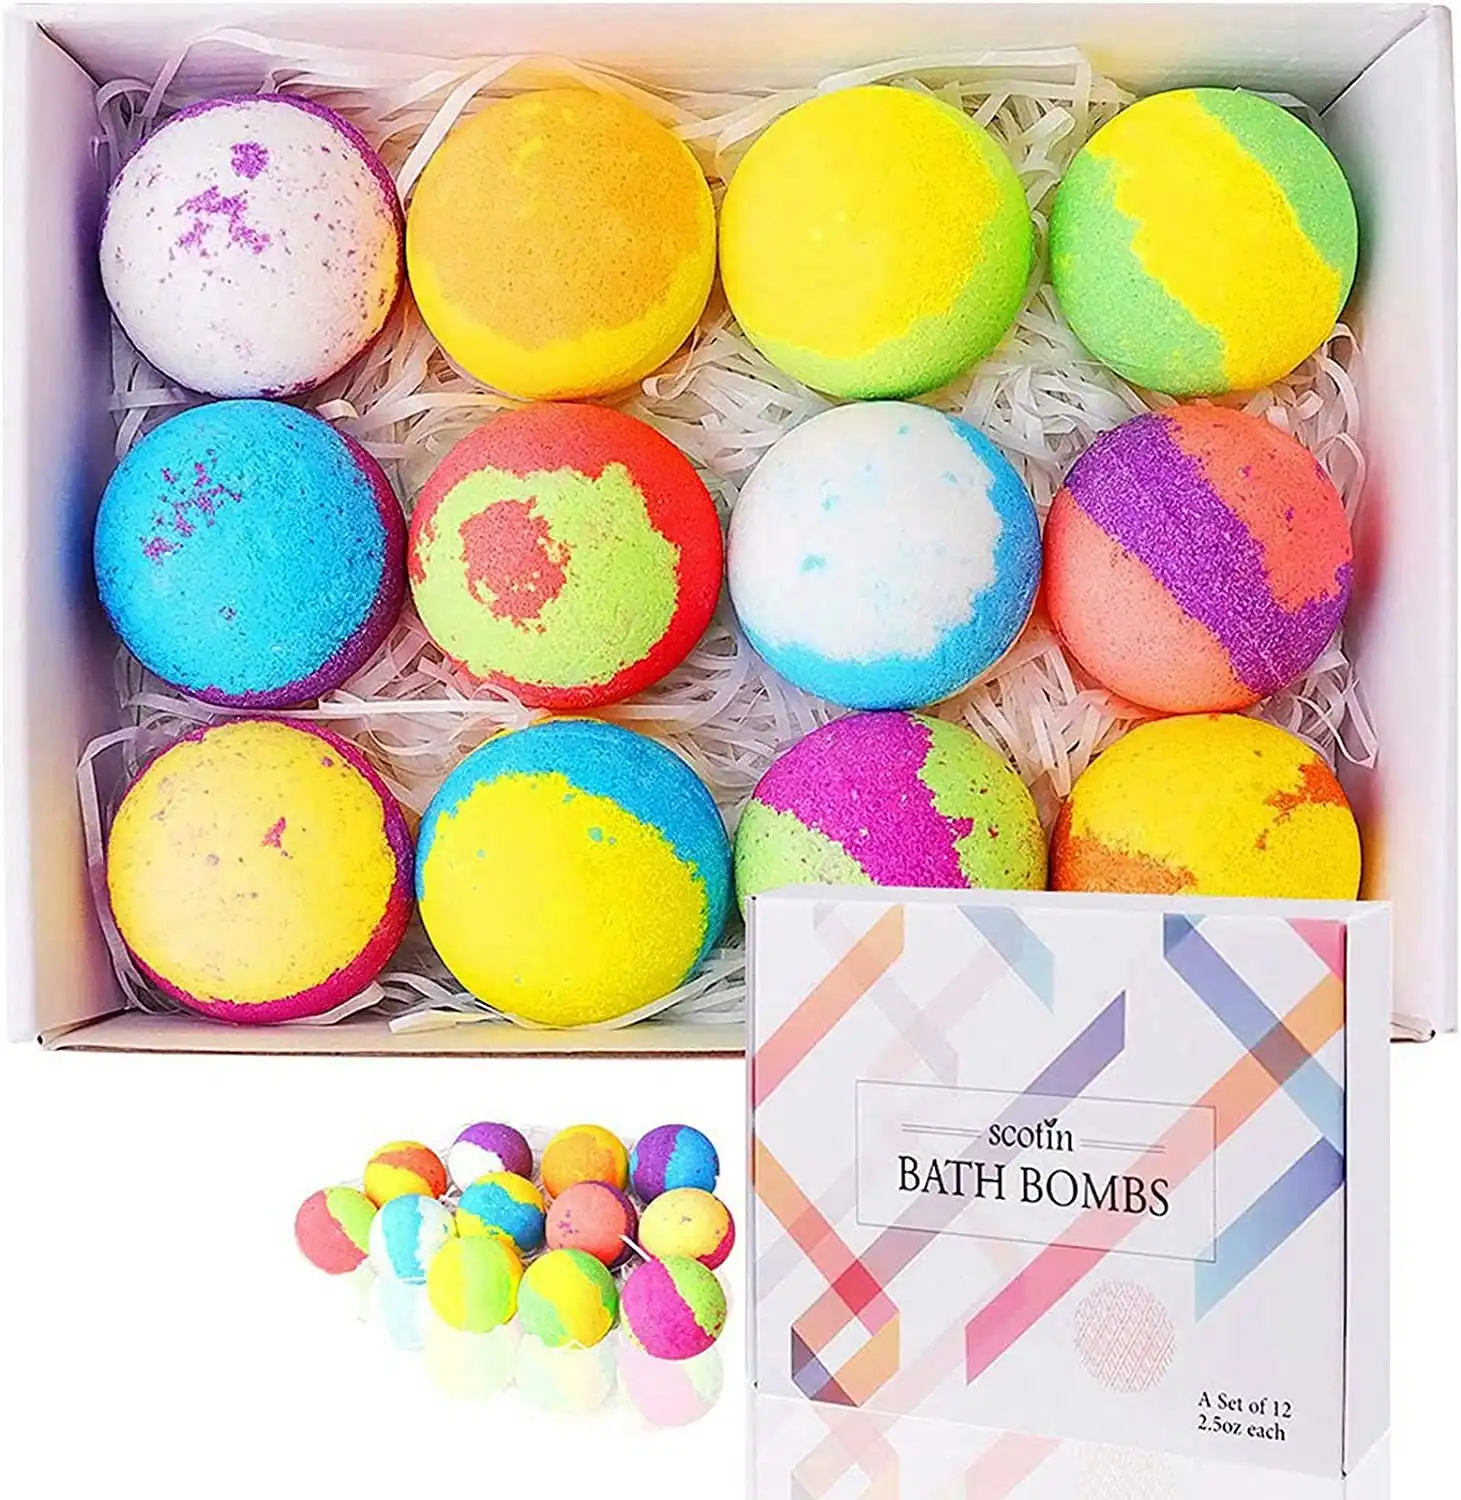 12 Pcs Handmade Bath Bombs Set with natural essential oil